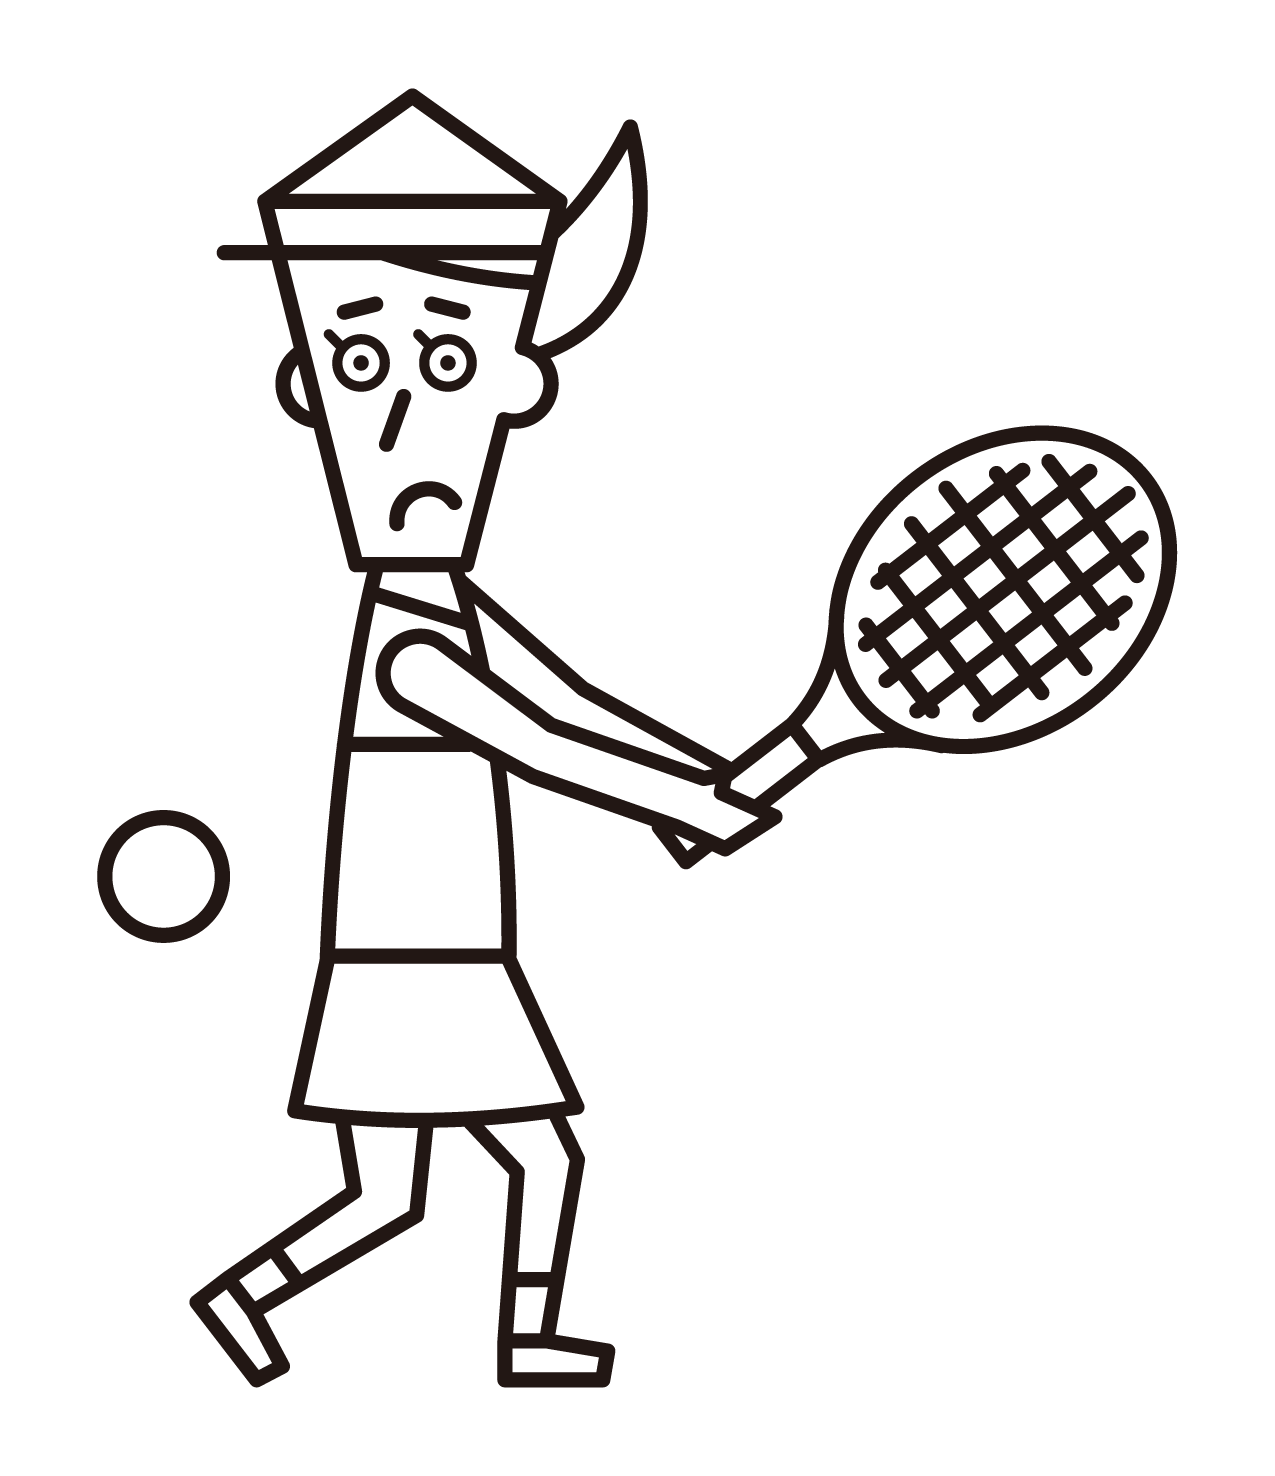 Illustration of a tennis player (female) hitting the ball back with a backhand stroke